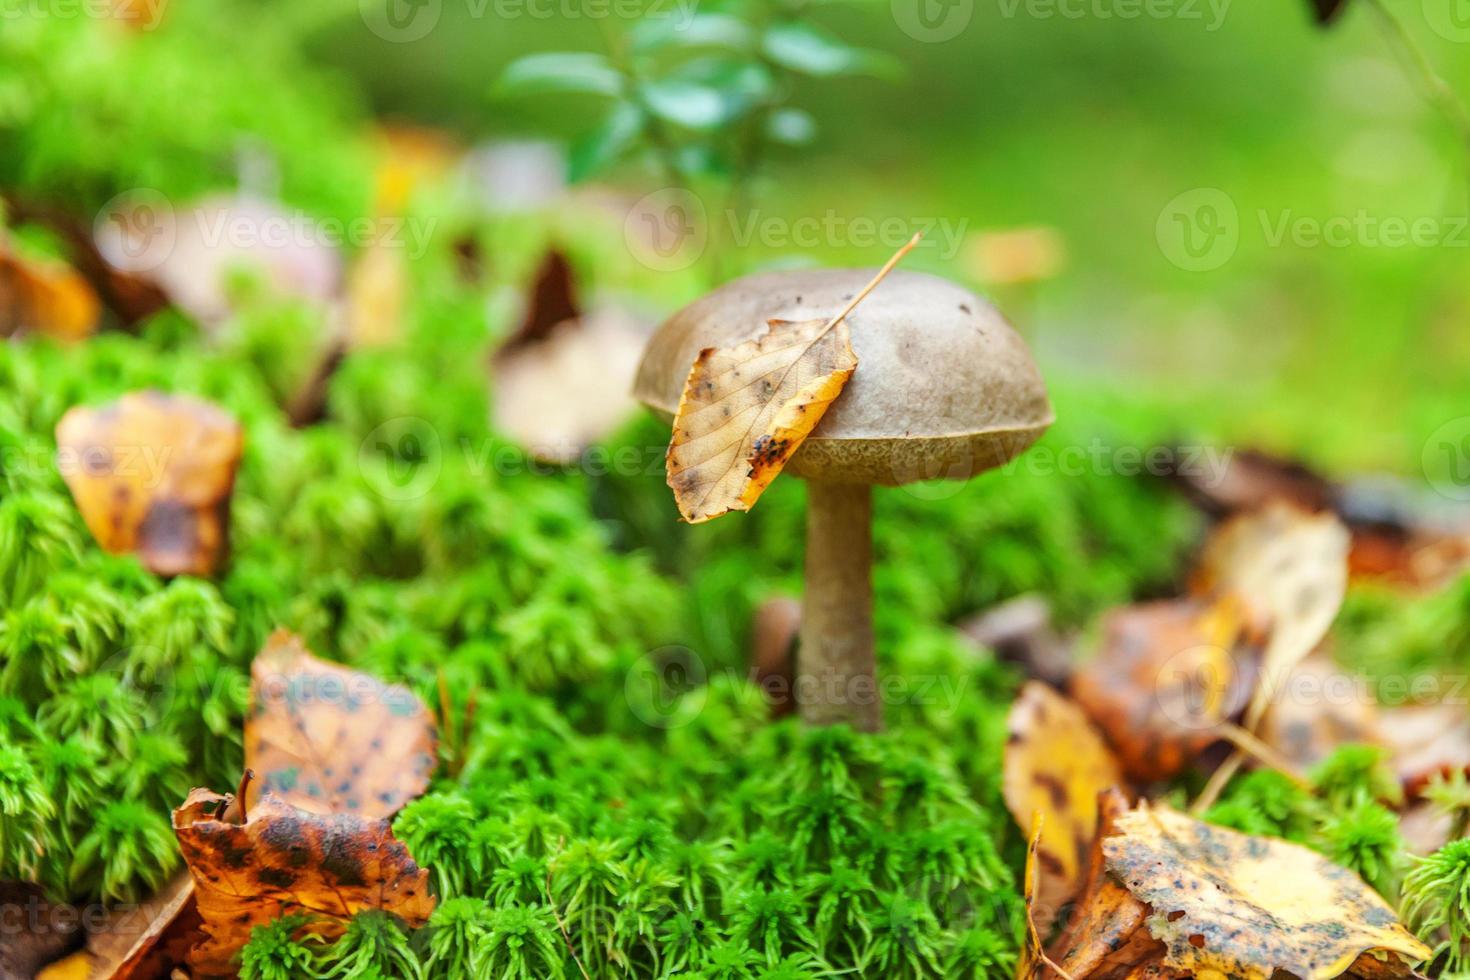 Edible small mushroom with brown cap Penny Bun leccinum in moss autumn forest background. Fungus in the natural environment. Big mushroom macro close up. Inspirational natural summer fall landscape photo